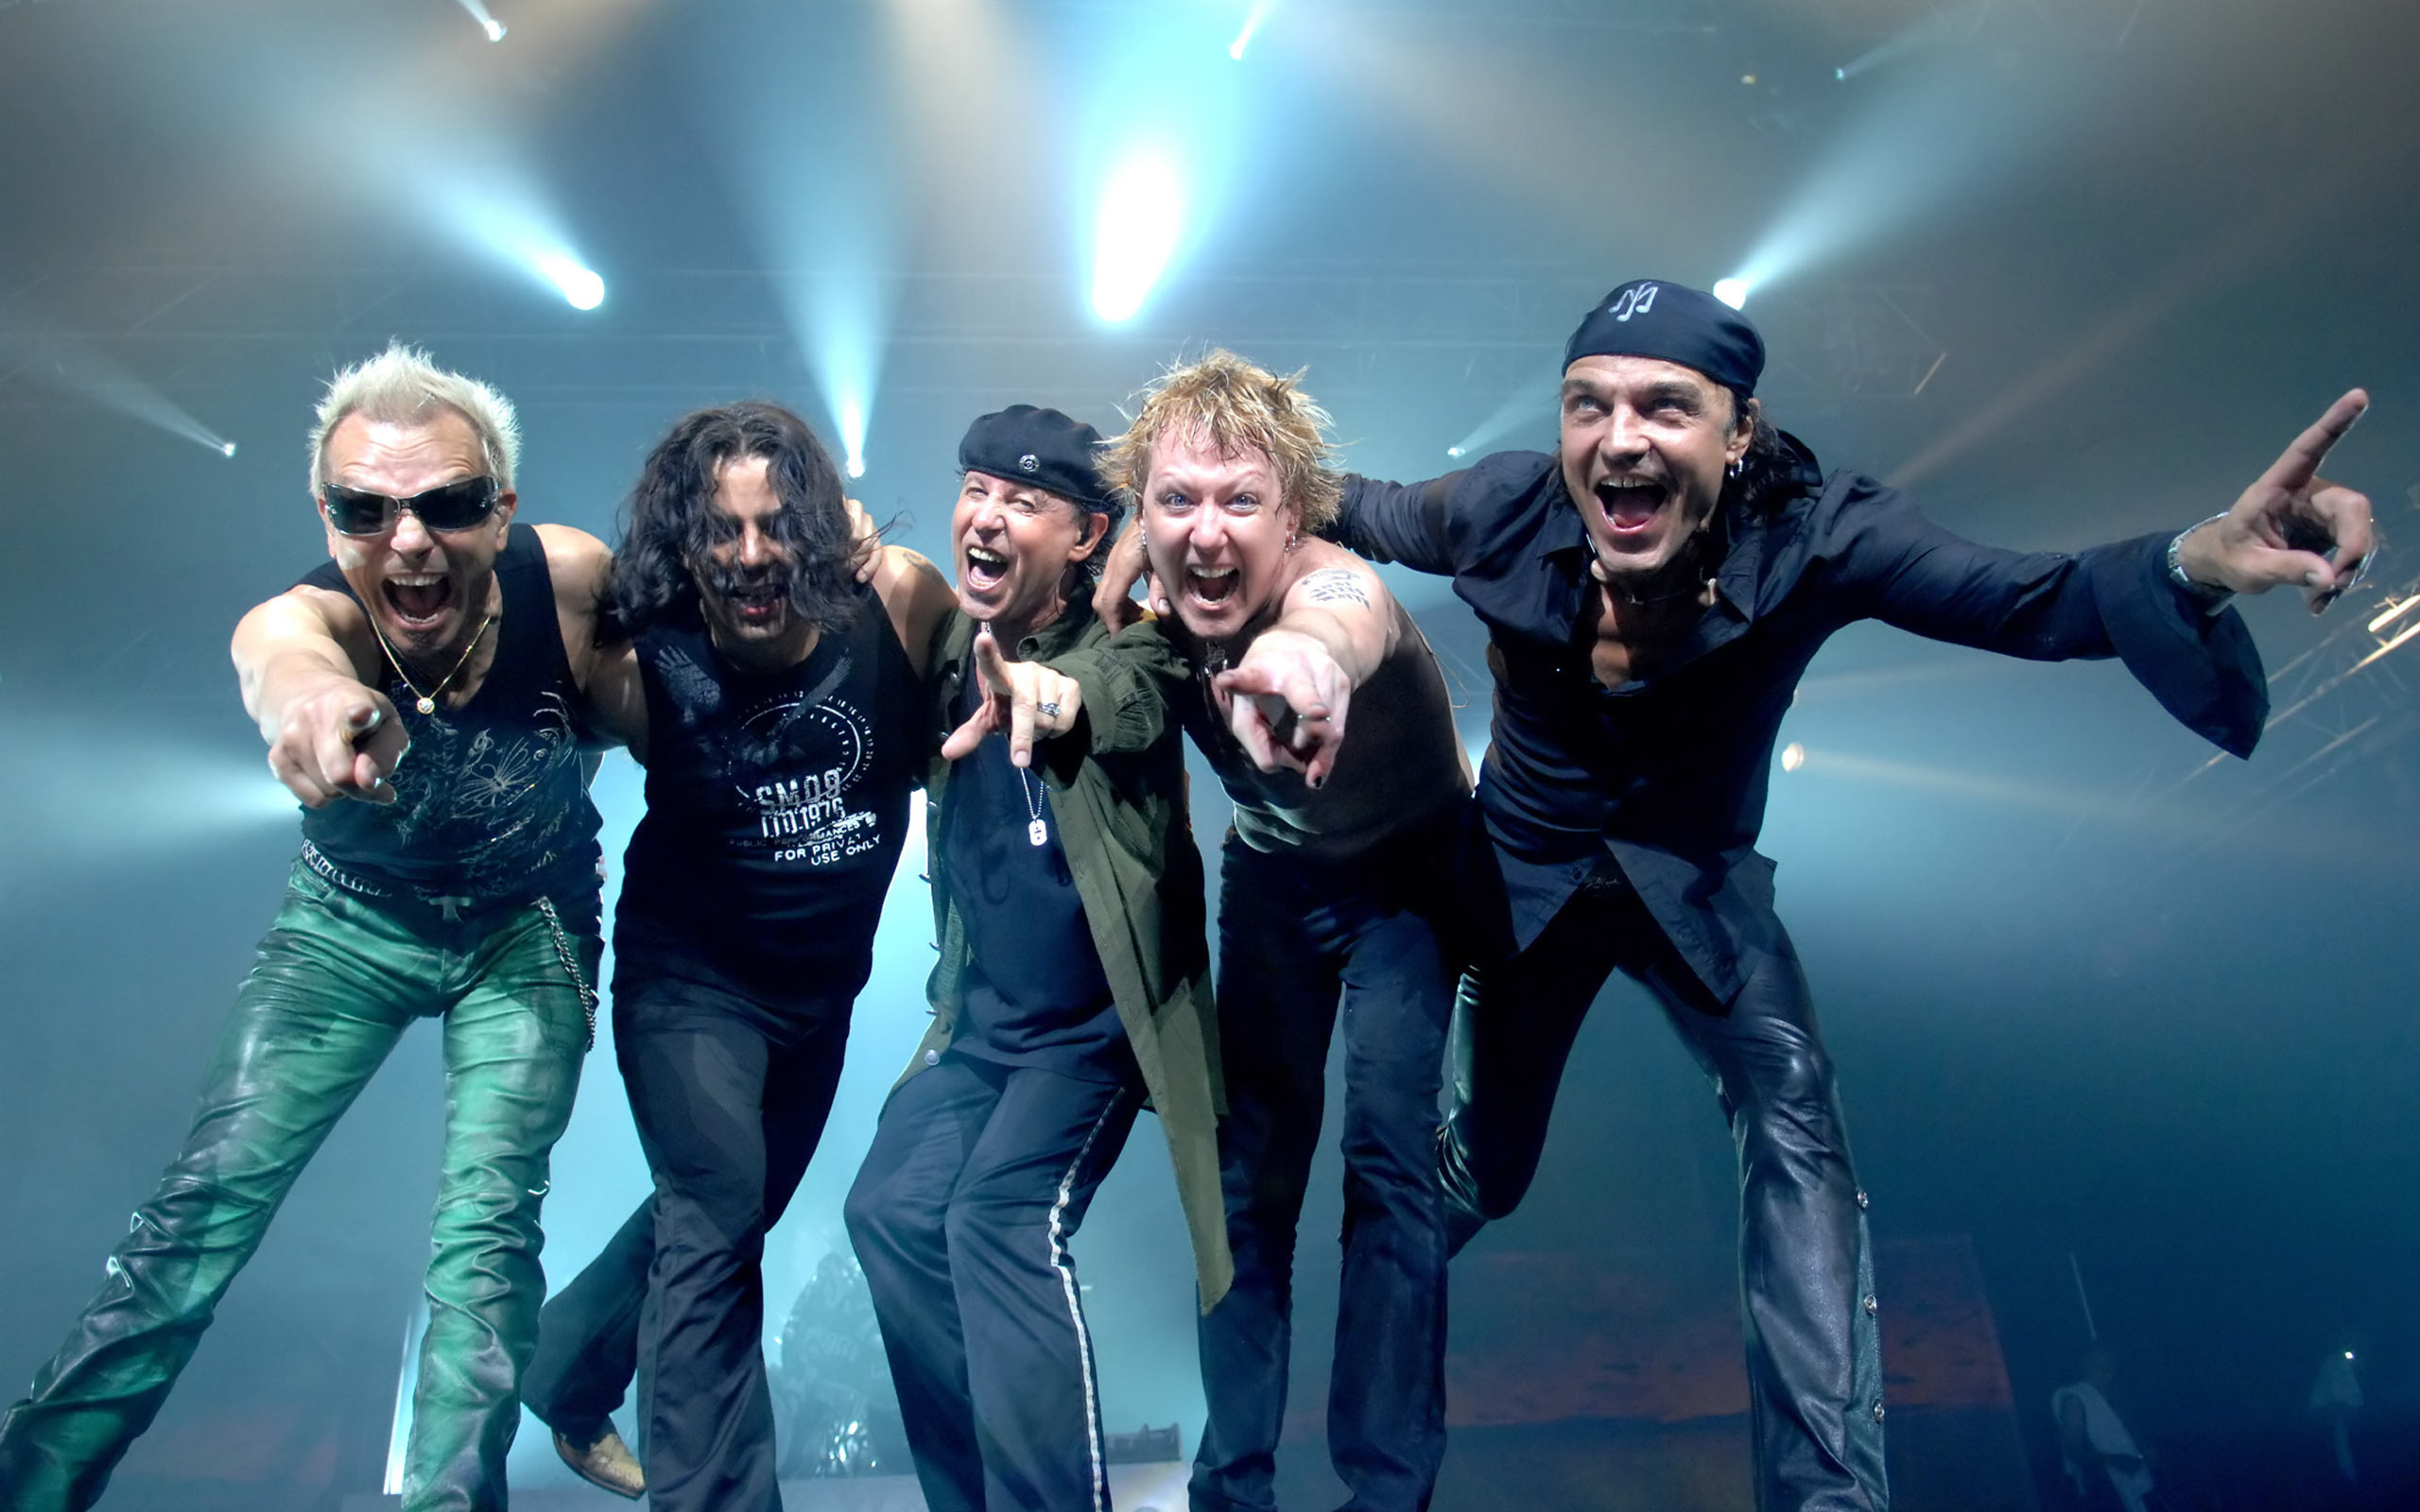 Scorpions band heavy metal hard rock band from Hannover Germany High